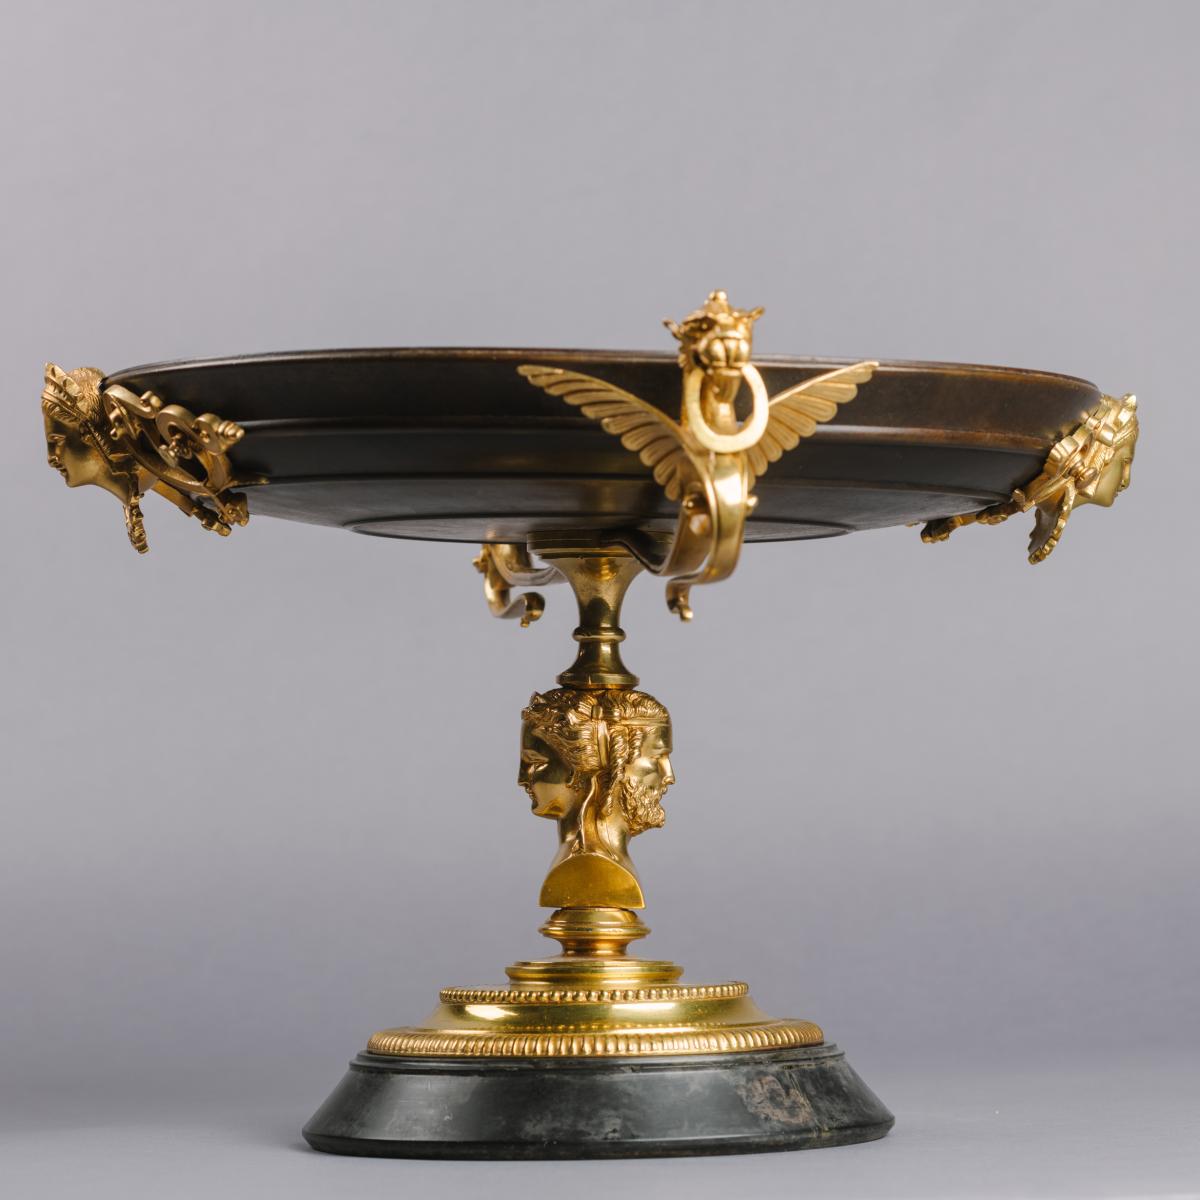 Neoclassical Revival Gilt and Patinated Bronze Tazza